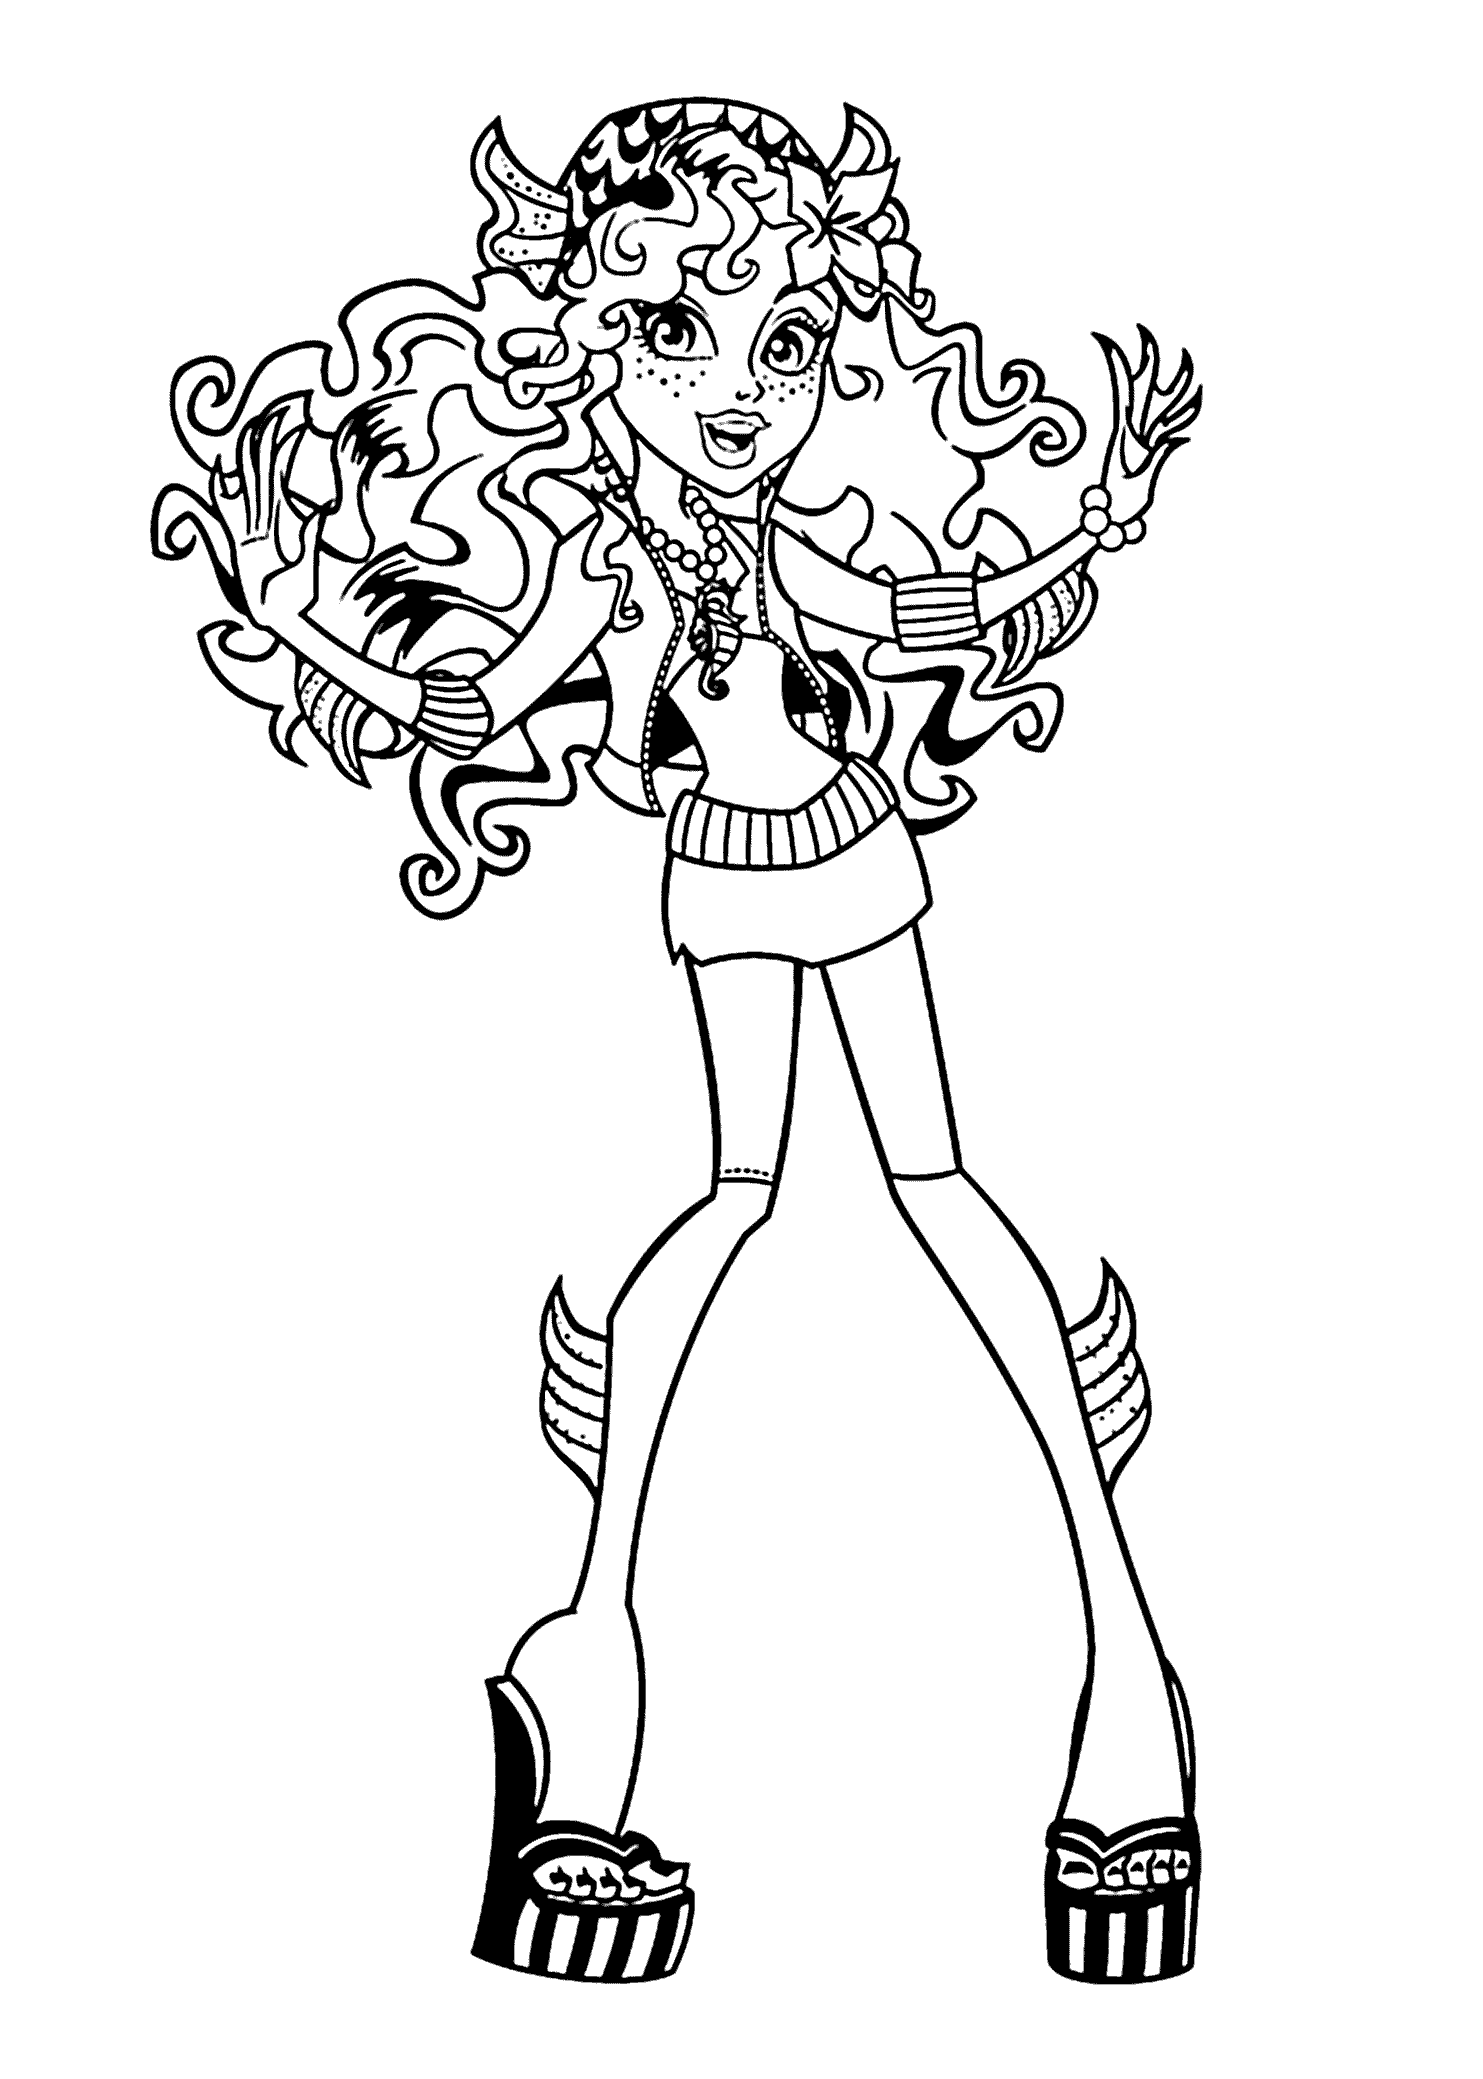 Monster High Coloring Pages For Kids Perfect - Coloring pages